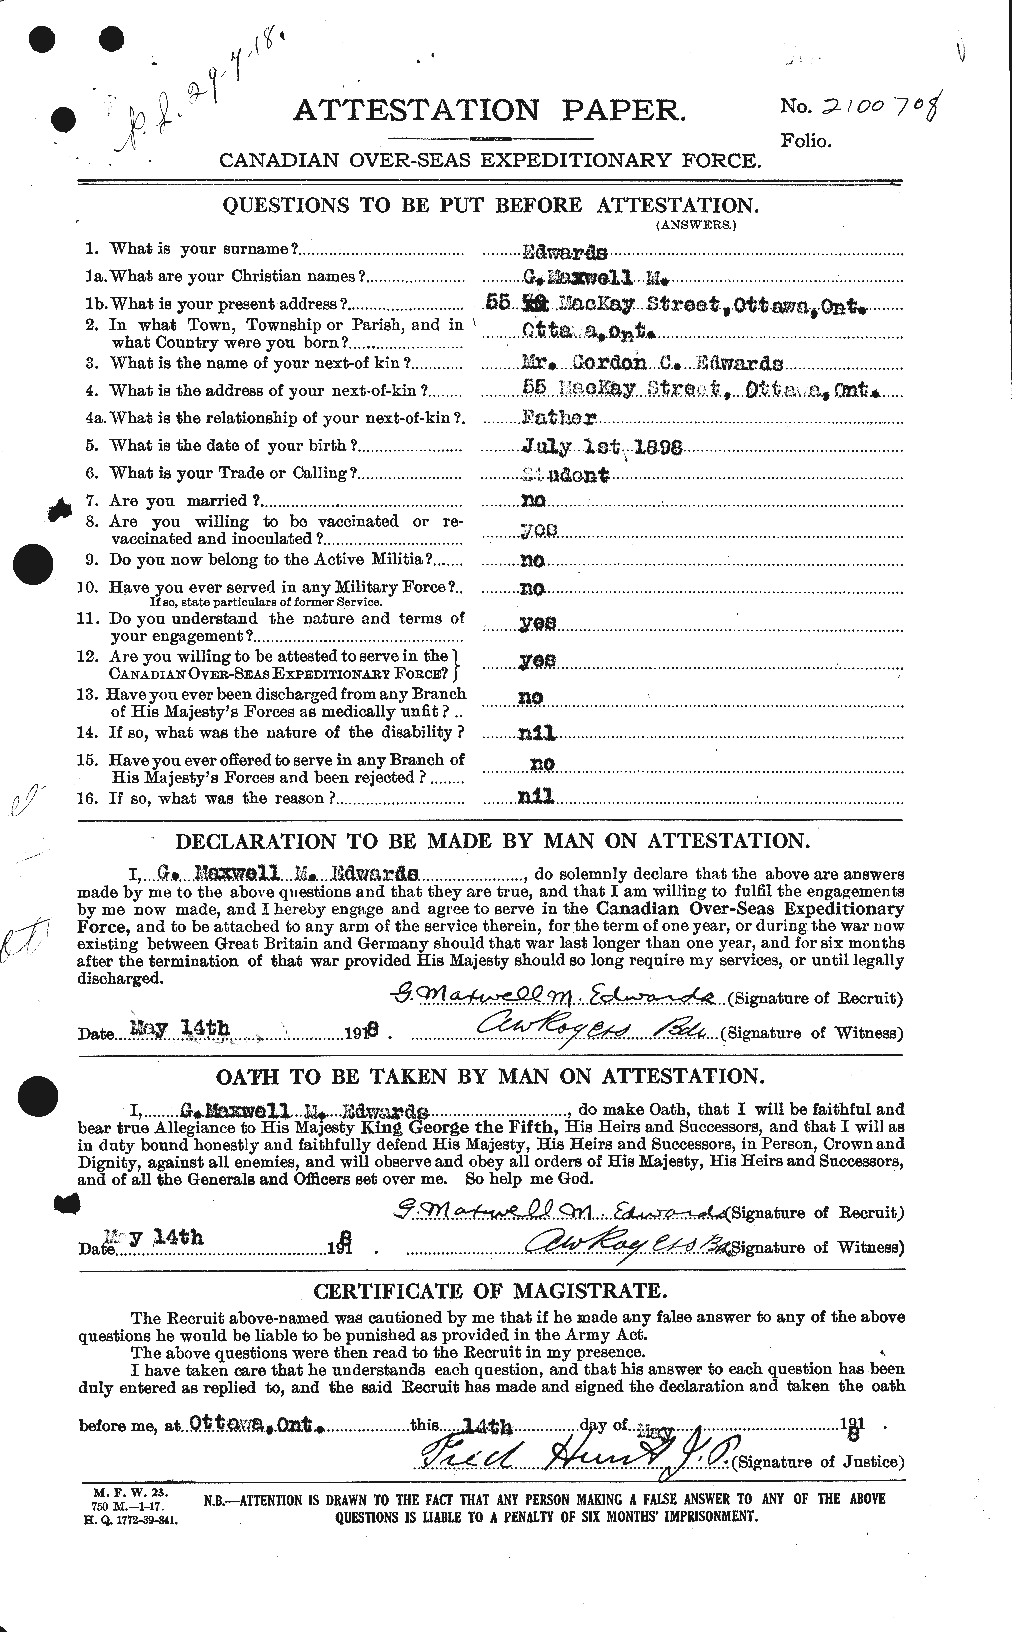 Personnel Records of the First World War - CEF 309086a